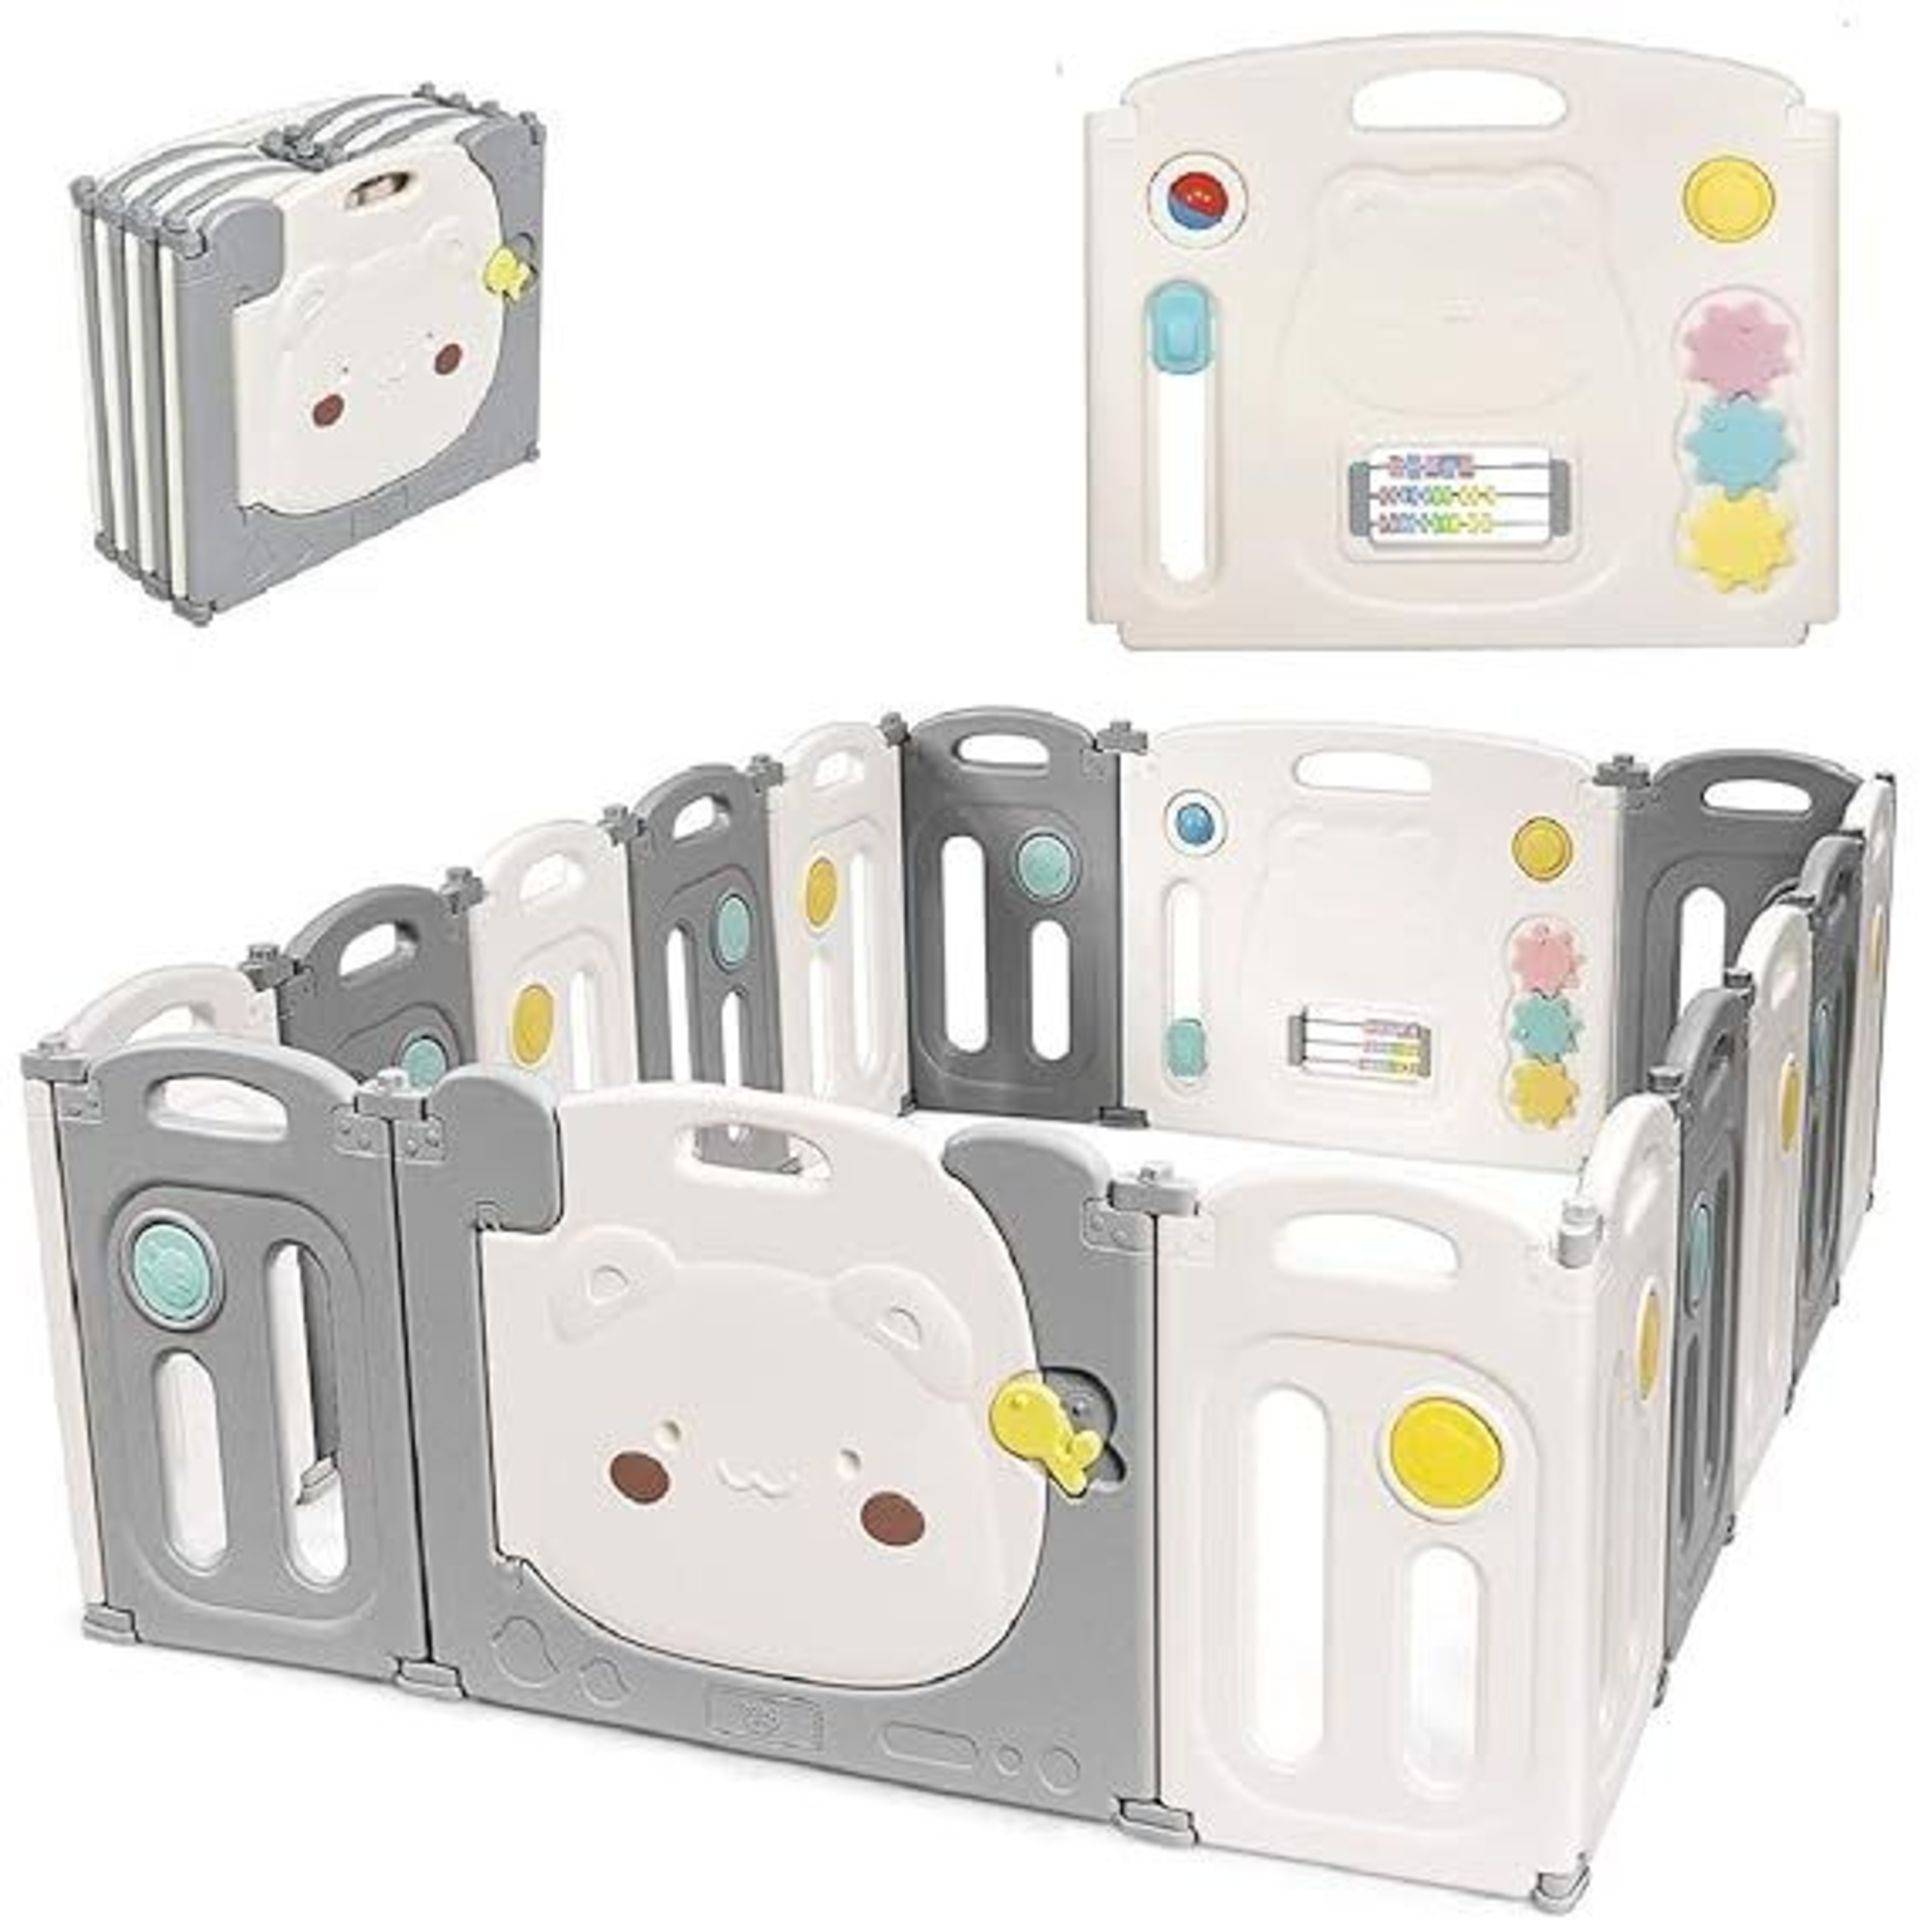 Costzon Baby Playpen, 16 Panel Foldable Thicken Kids Safety Play Fence with Storage Bag, Door with